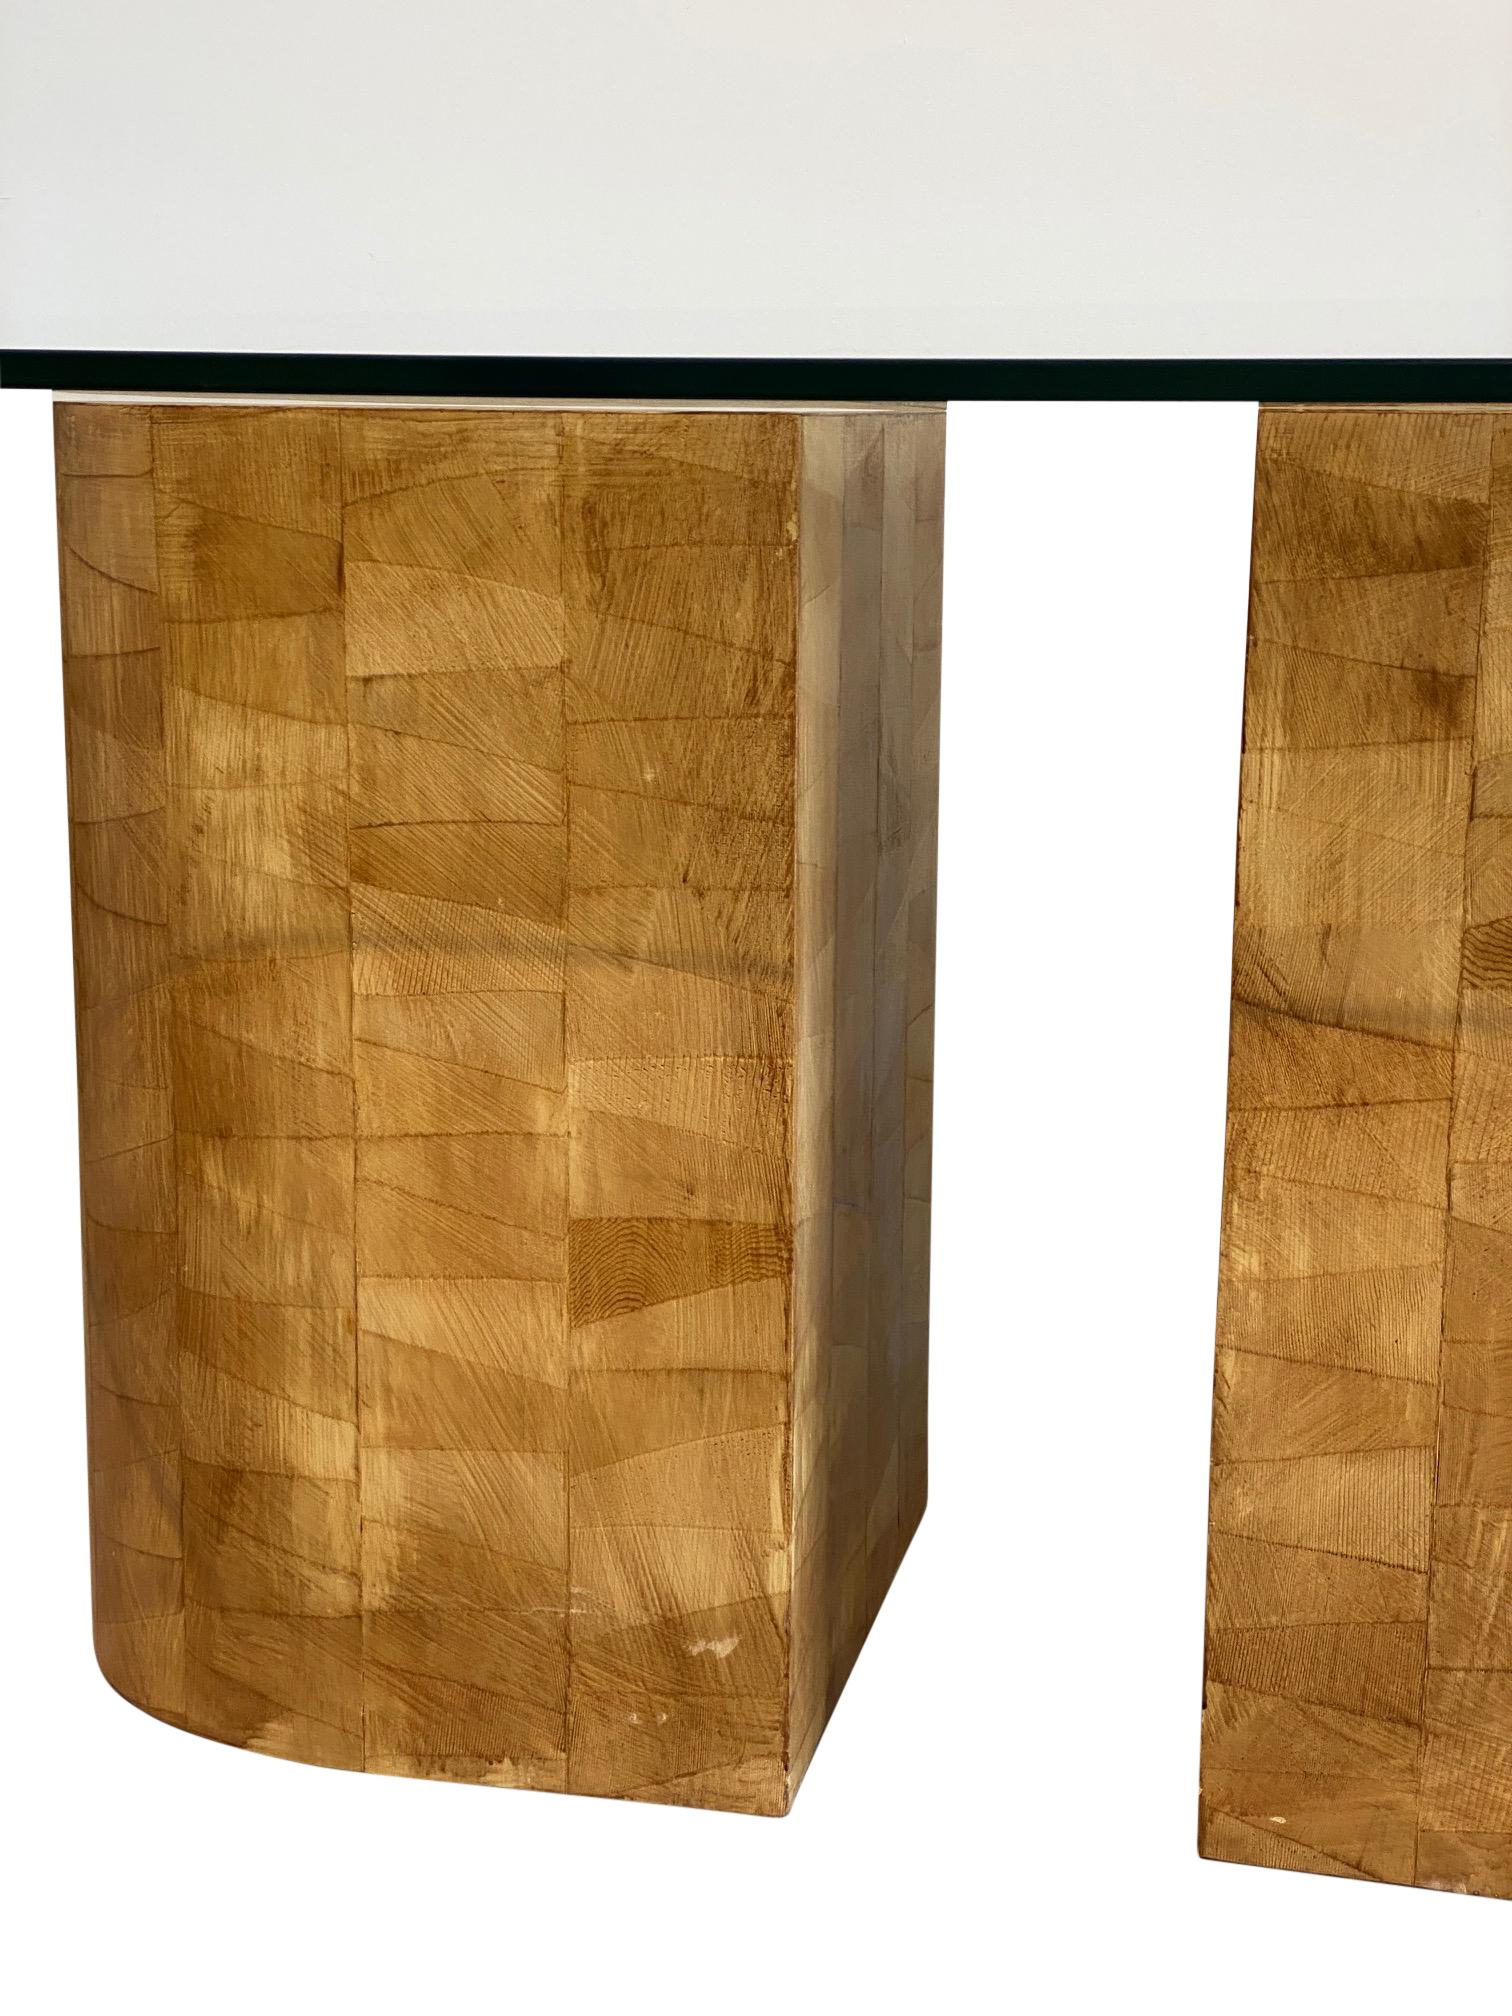 Two-Piece Solid Wooden Blocks Dining Table For Sale 2